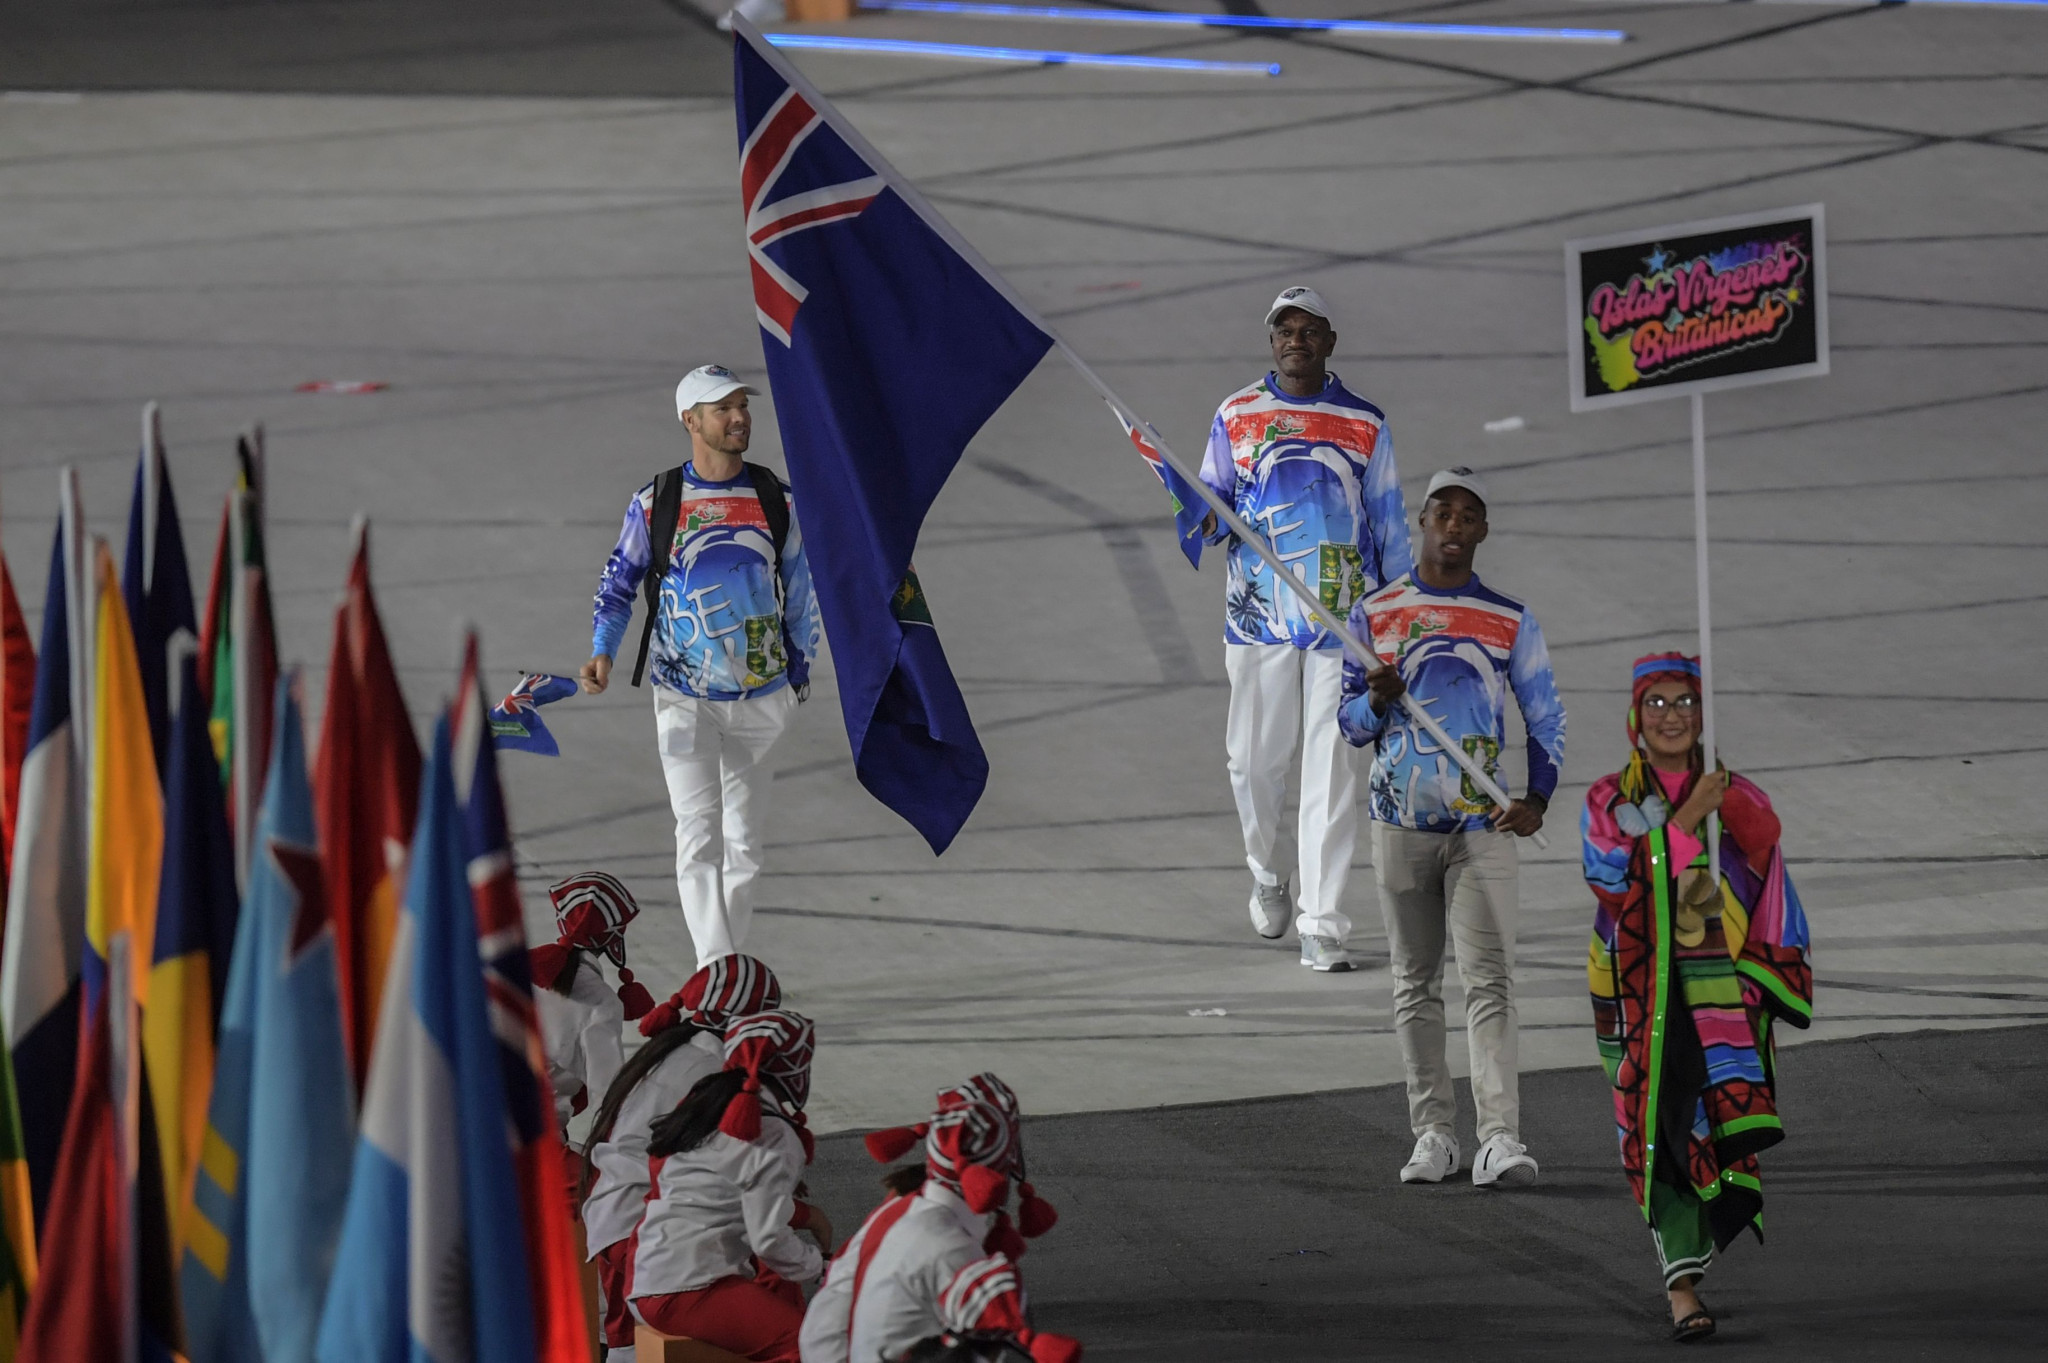 The British Virgin Islands have been granted permission to use their territorial song rather than their national anthem at IOC events ©Getty Images